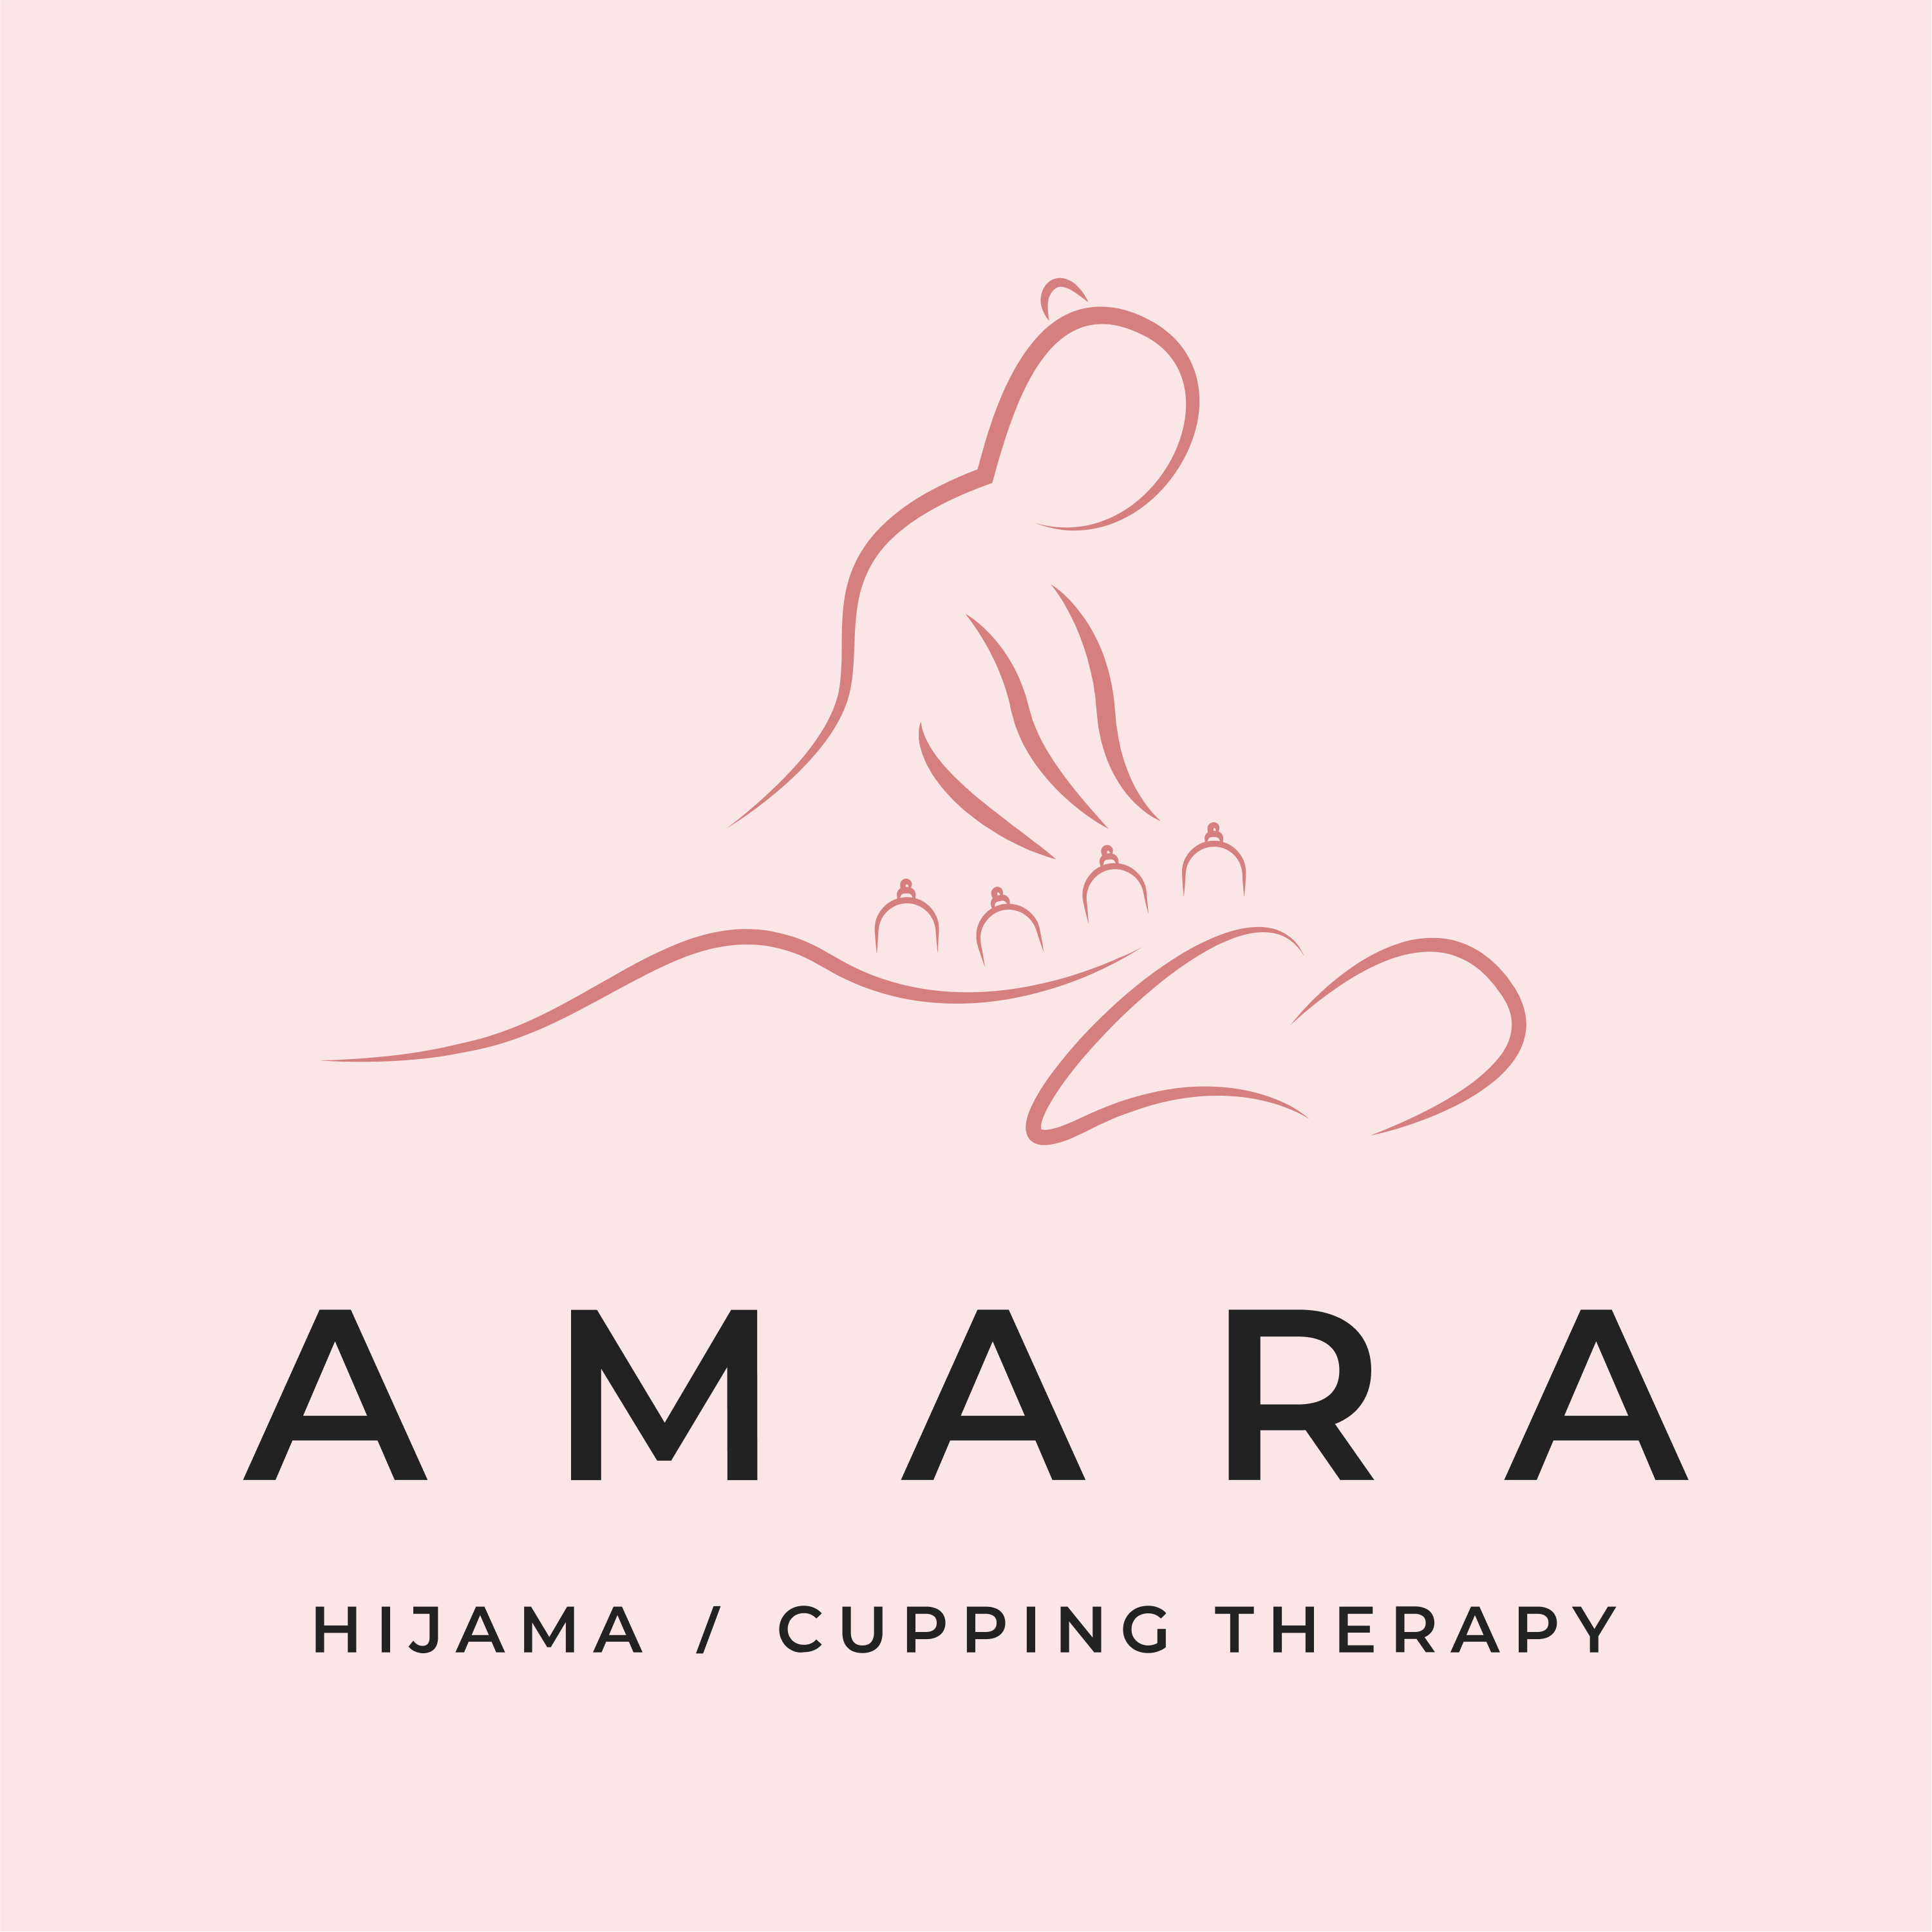 Amara Hijama / Cupping Therapy Mangalore|Veterinary|Medical Services